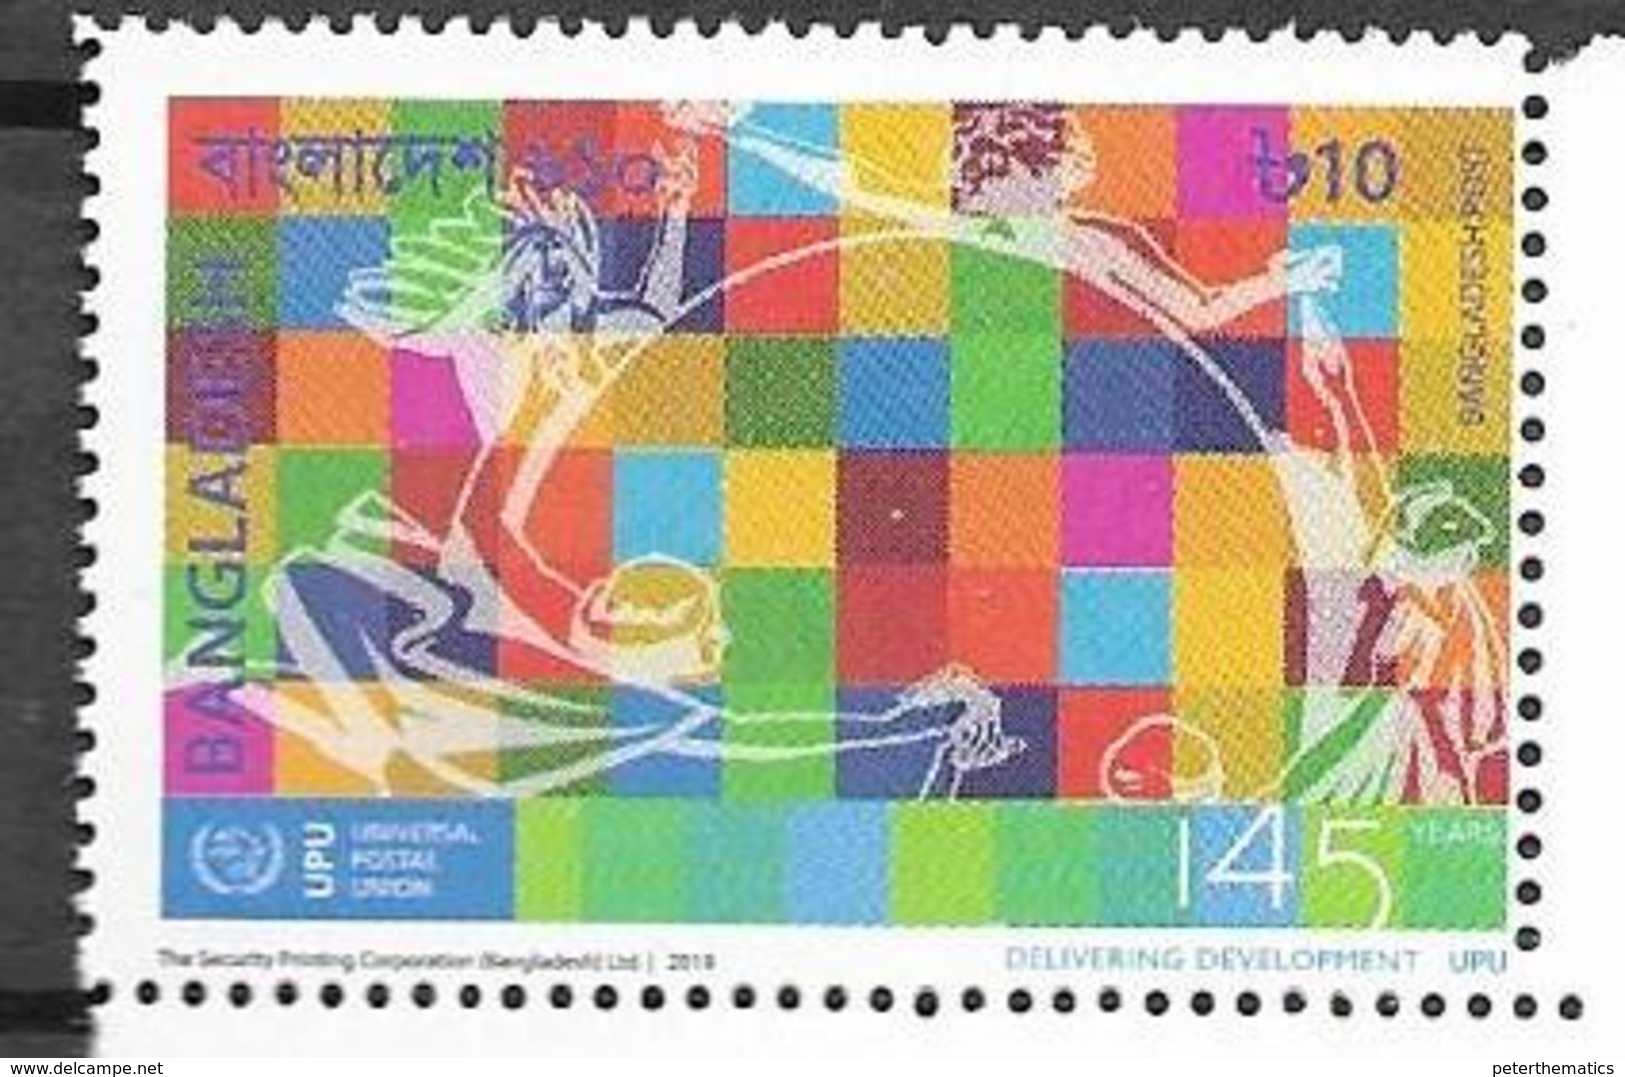 BANGLADESH, 2019, MNH, JOINT ISSUES, UPU,1v - Joint Issues